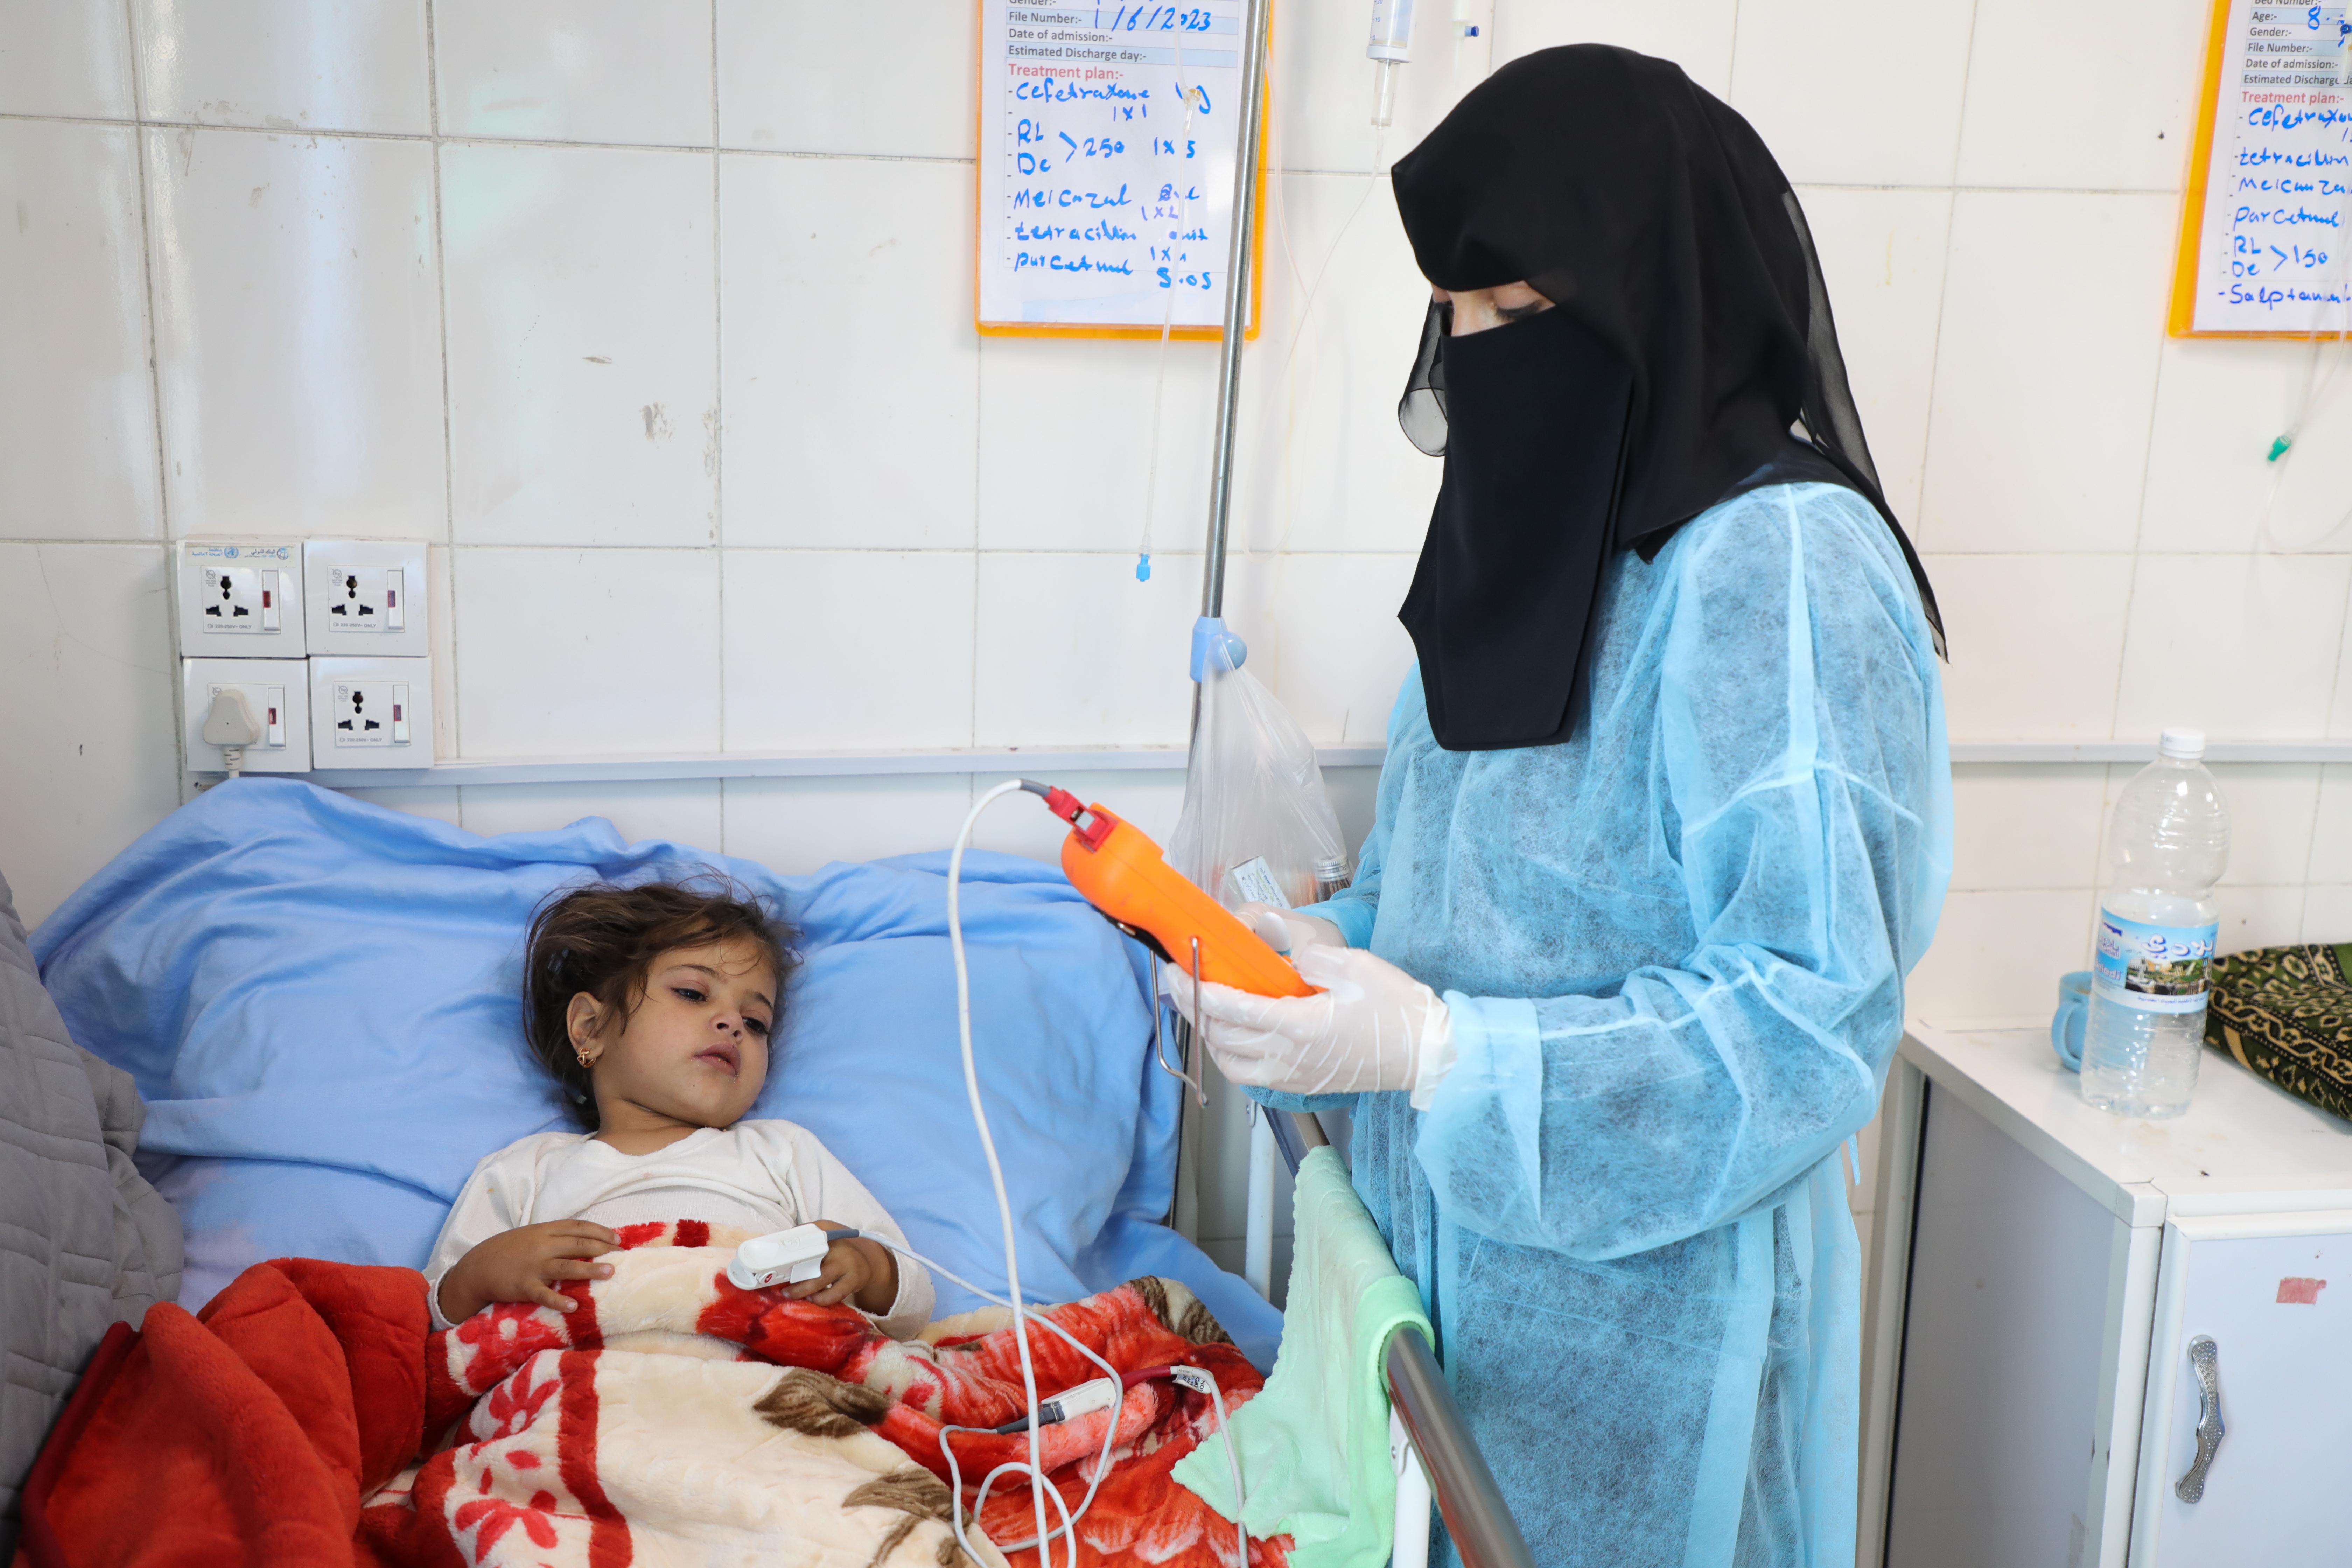 Grave health crisis as measles cases surge in Yemen